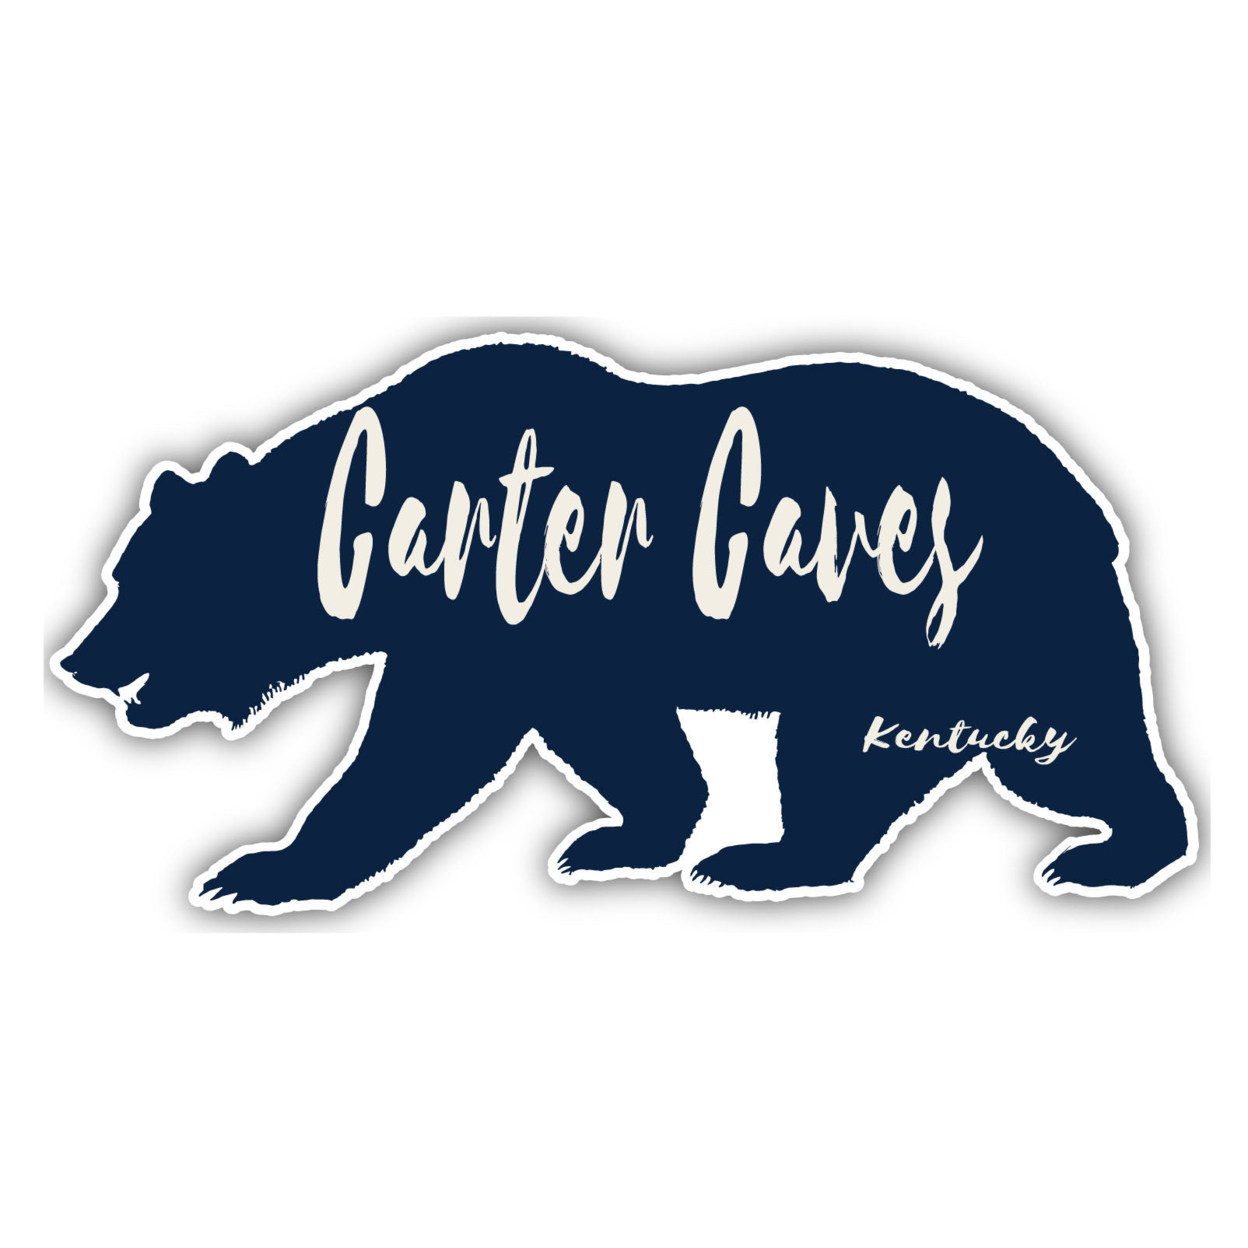 Carter Caves Kentucky Souvenir Decorative Stickers (Choose Theme And Size) - 4-Pack, 6-Inch, Bear